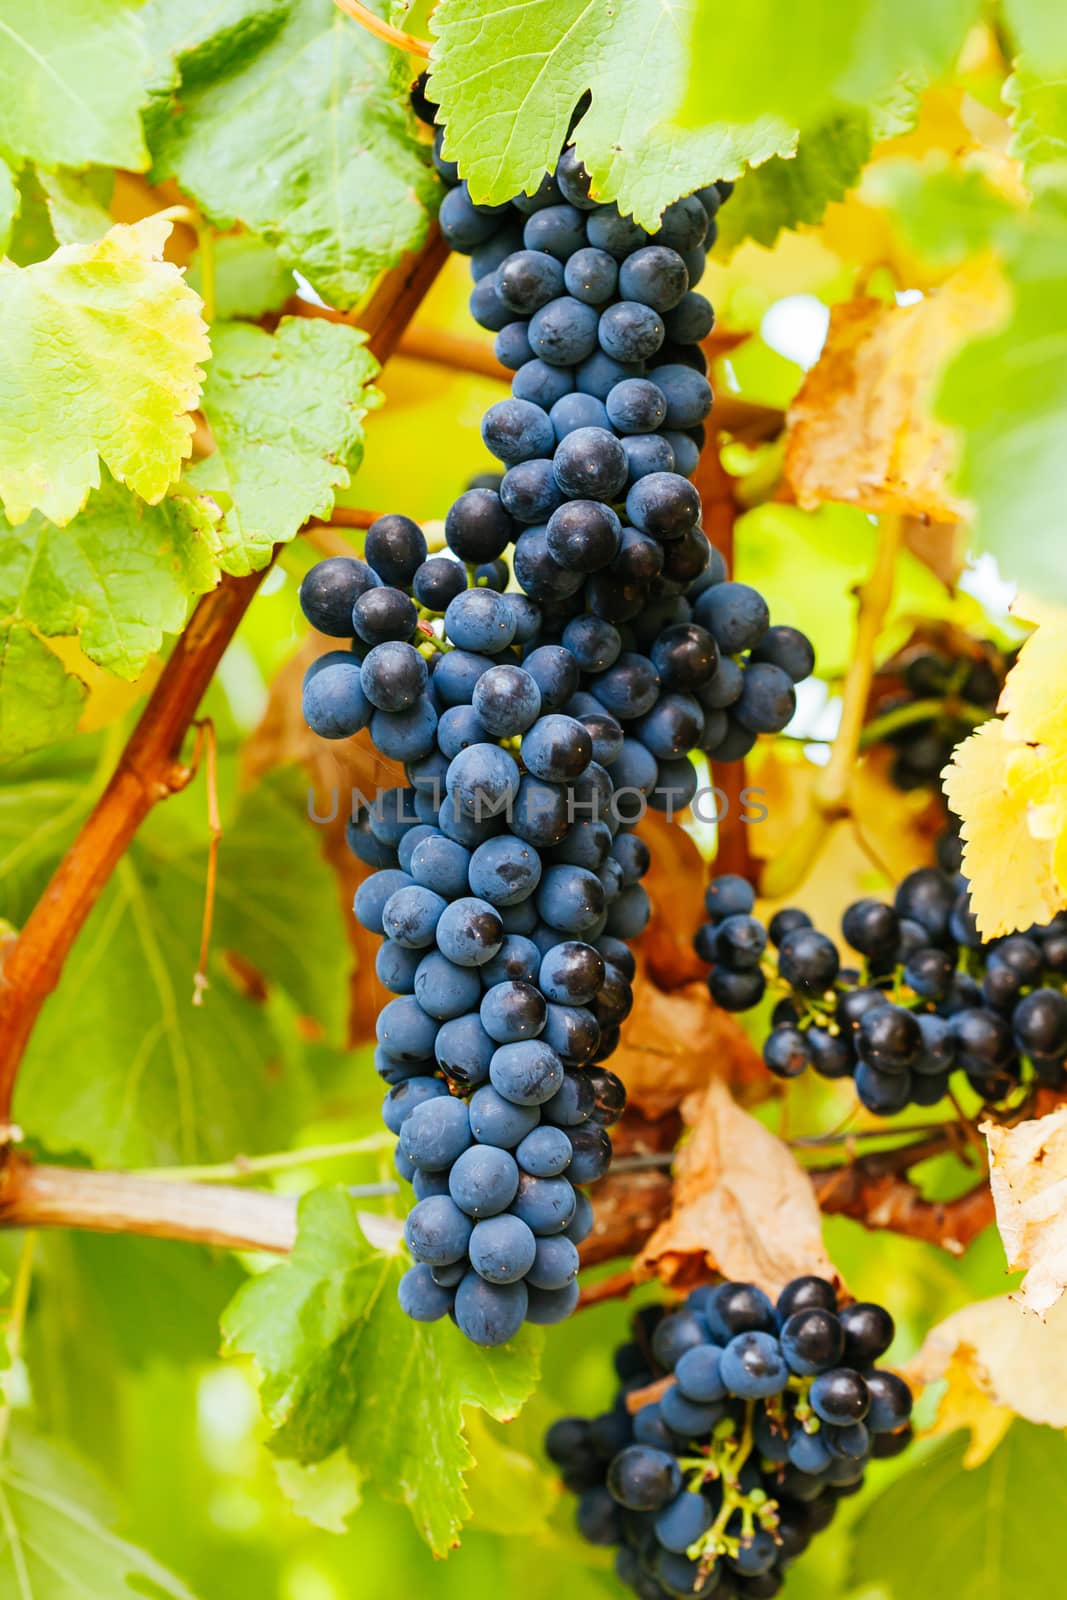 Ripe Pinot Noir Grapes in late harvest at a winery in Yarra Valley, Victoria, Australia